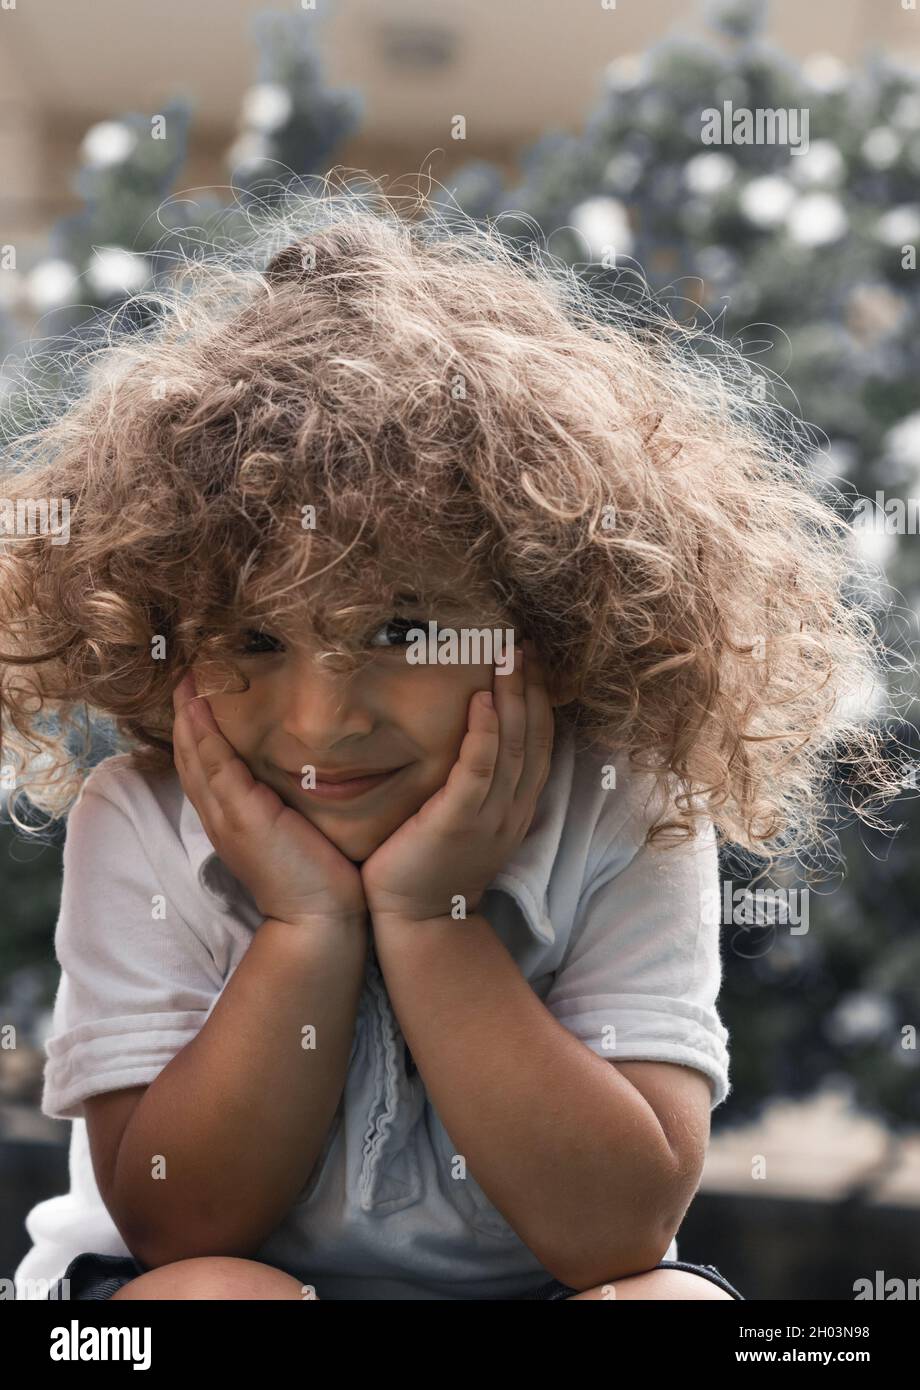 Closeup Portrait of a Nice Little Boy with a Beautiful Curly Hair. Happy Child Having Fun in the Park. Enjoying Carefree Childhood. Stock Photo